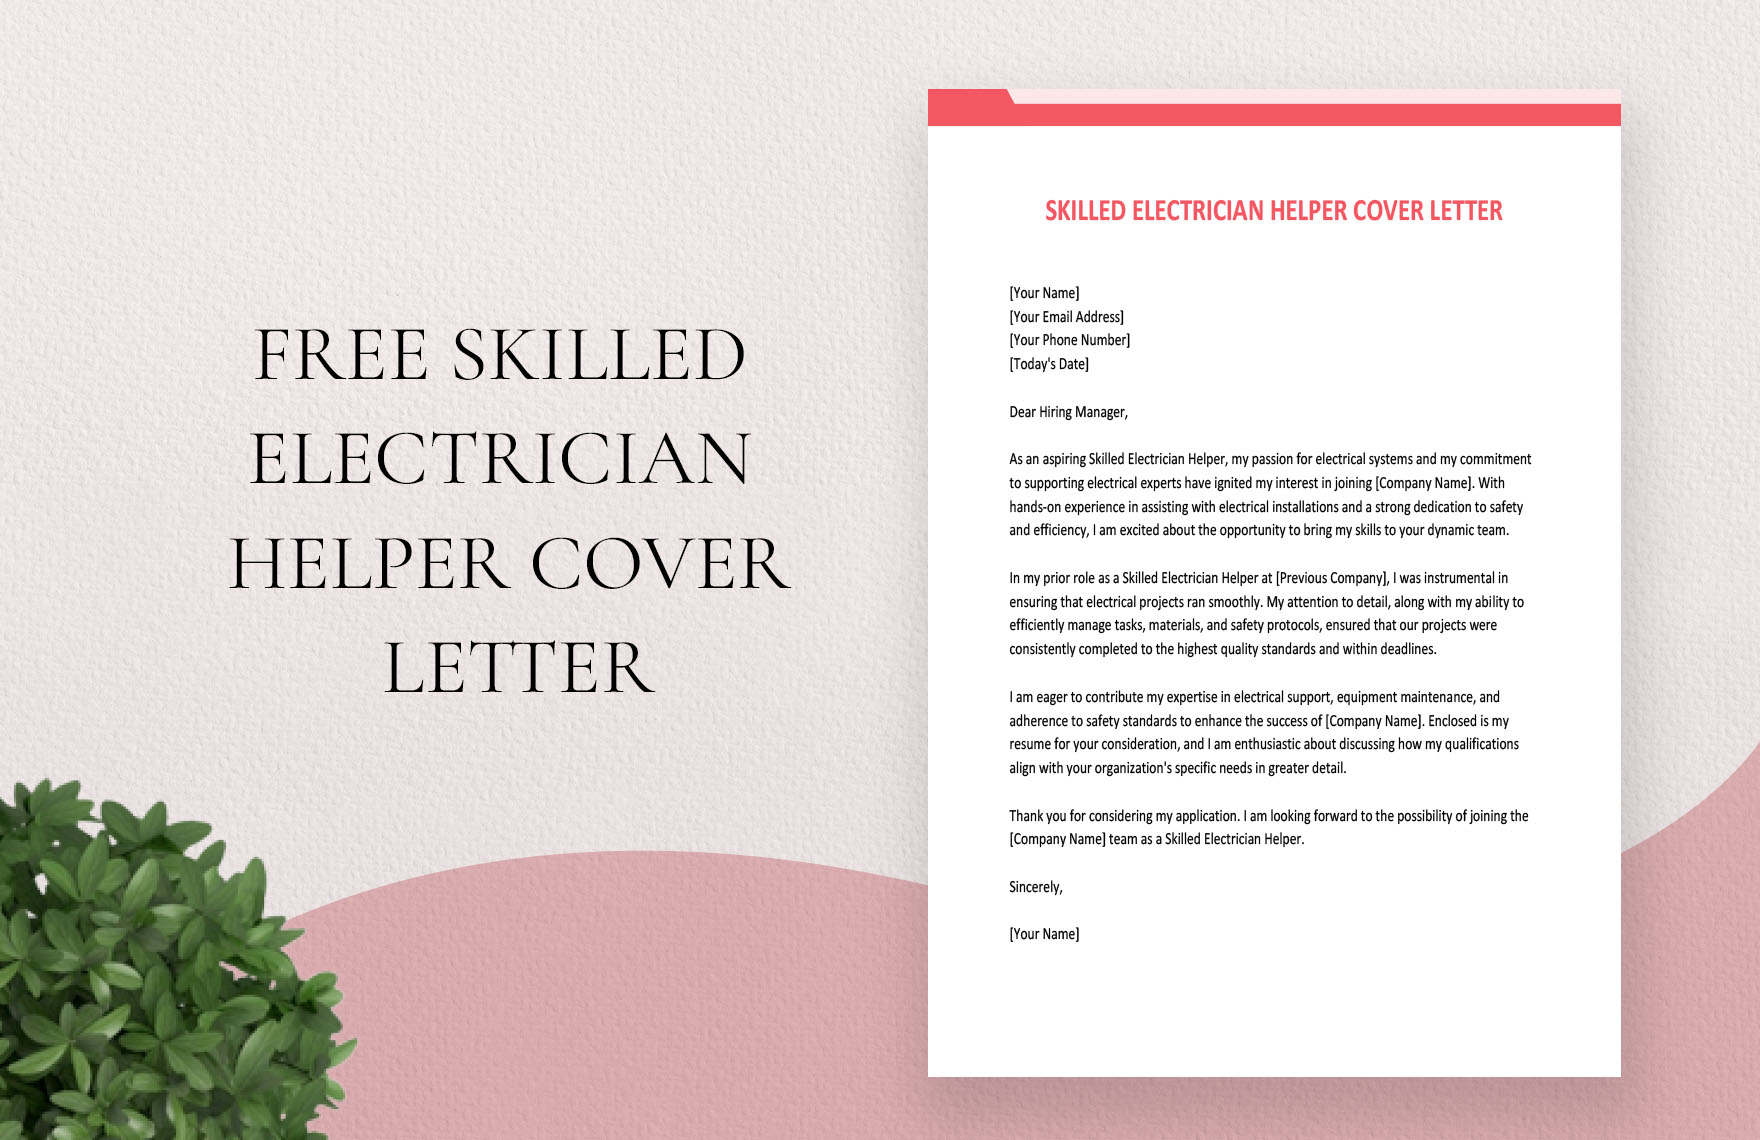 Skilled Electrician Helper Cover Letter